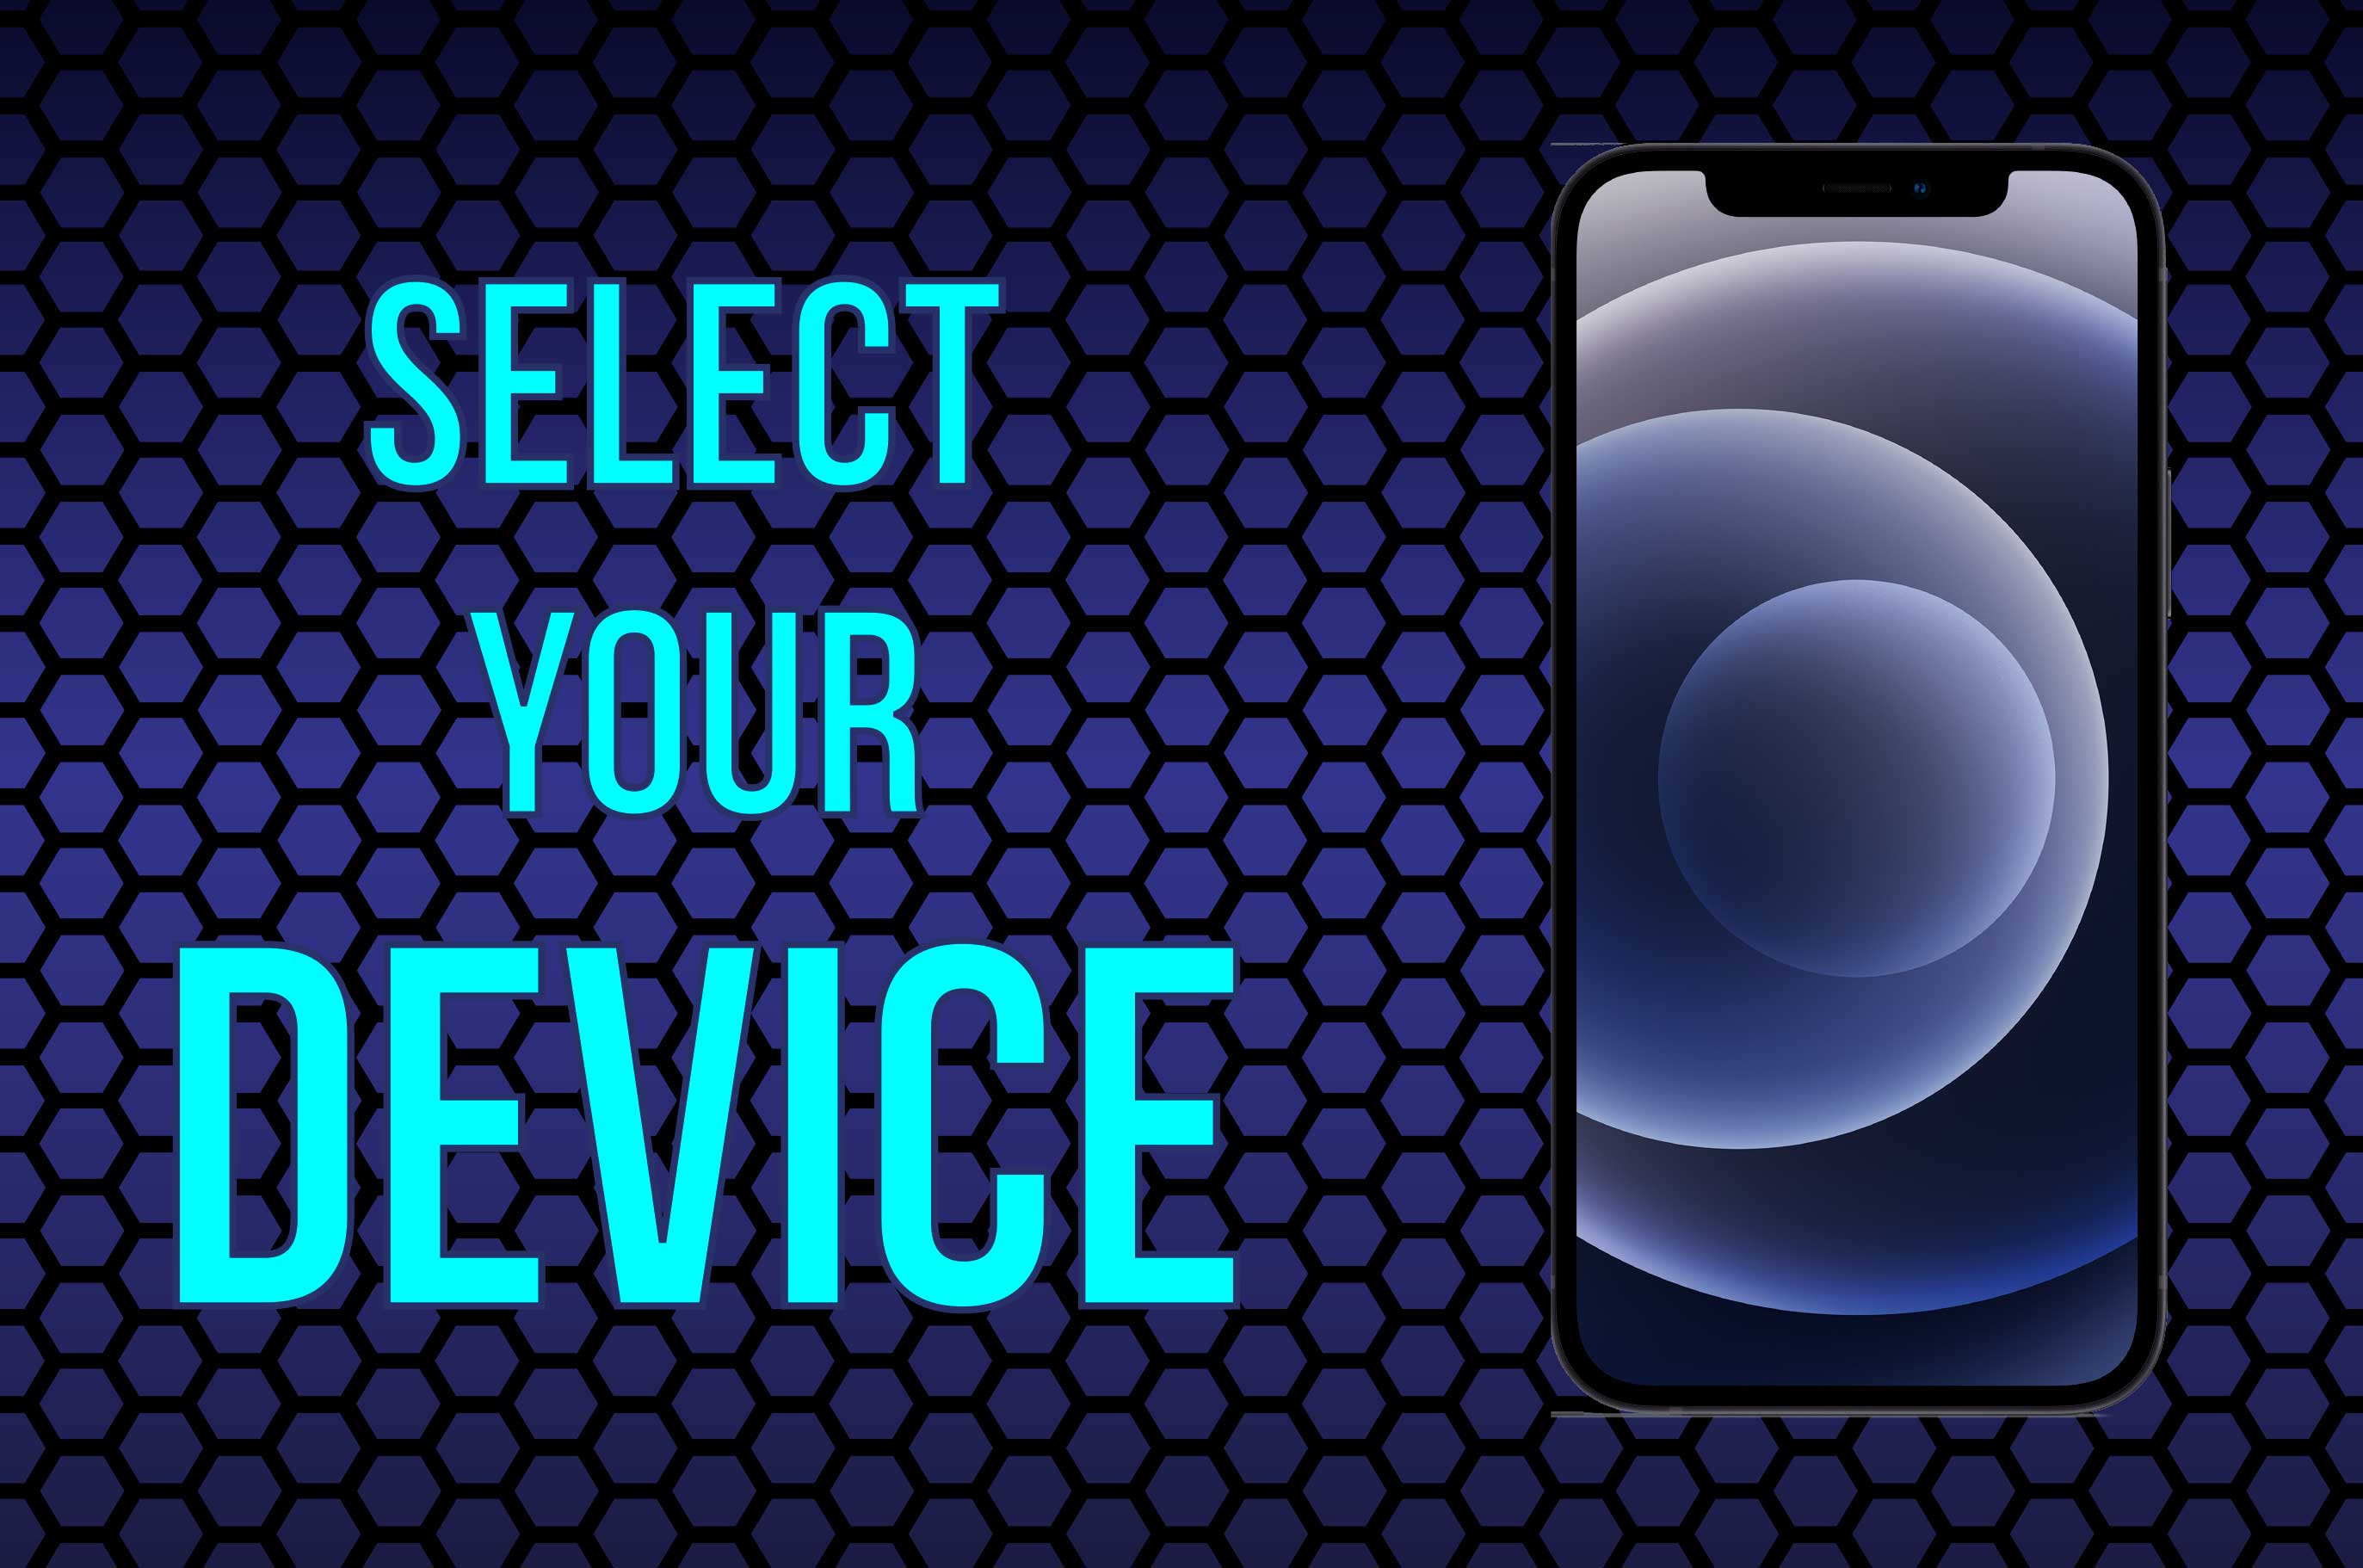 Select Your Device